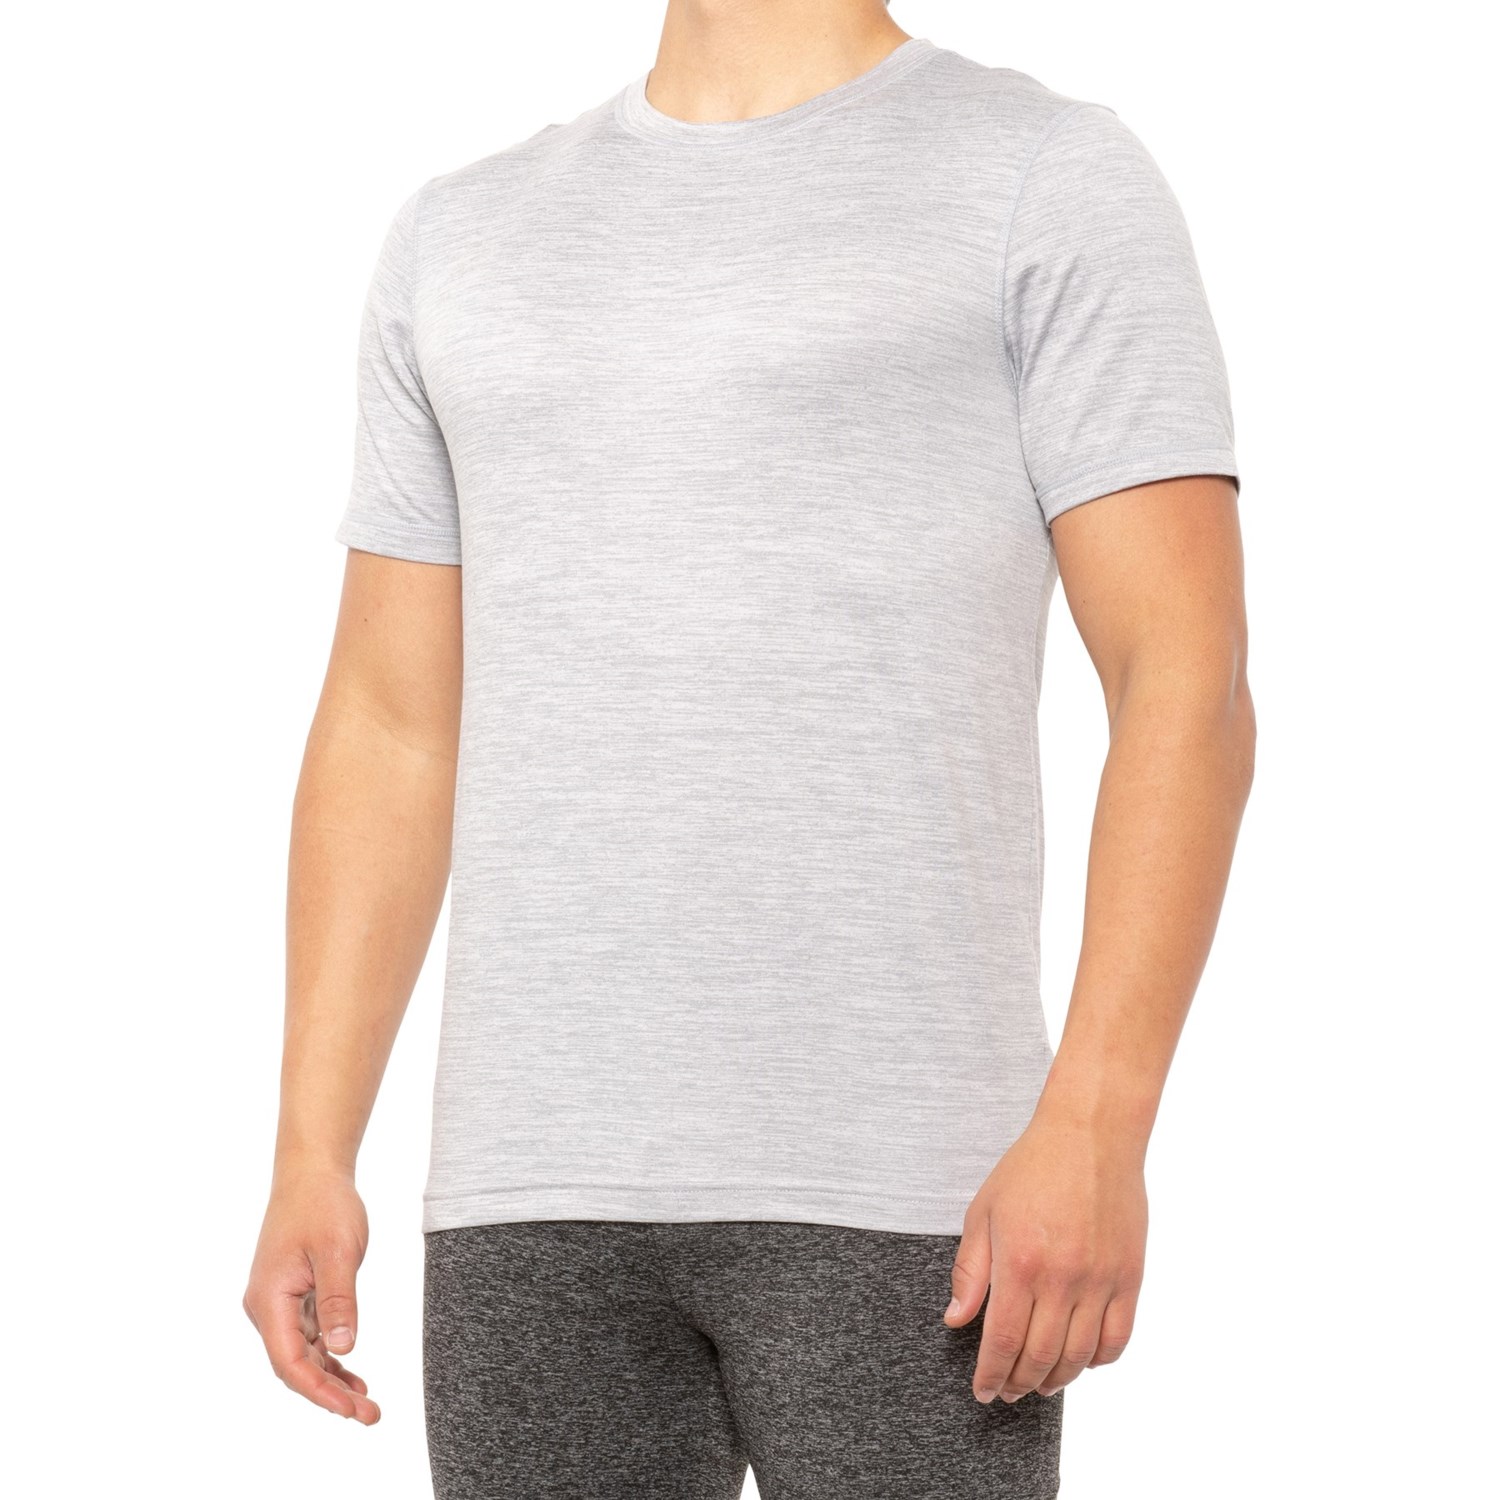 Gaiam Everyday Basic Crew T-Shirt (For Men) - Save 28%